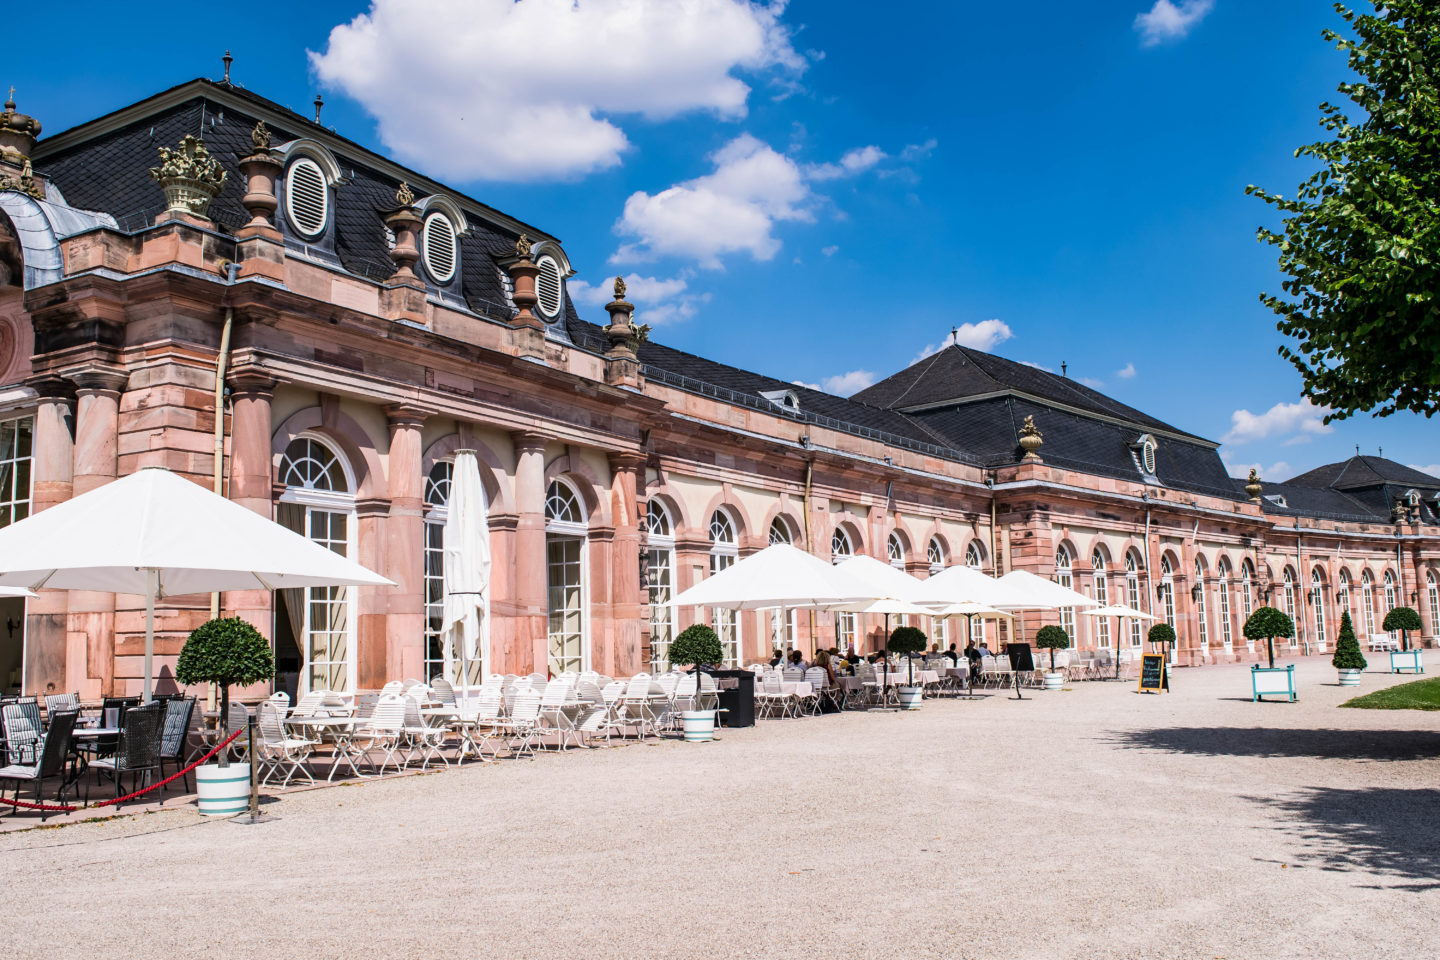 The palace gardens at Schwetzingen is one of the best places to visit in Baden-Württemberg.